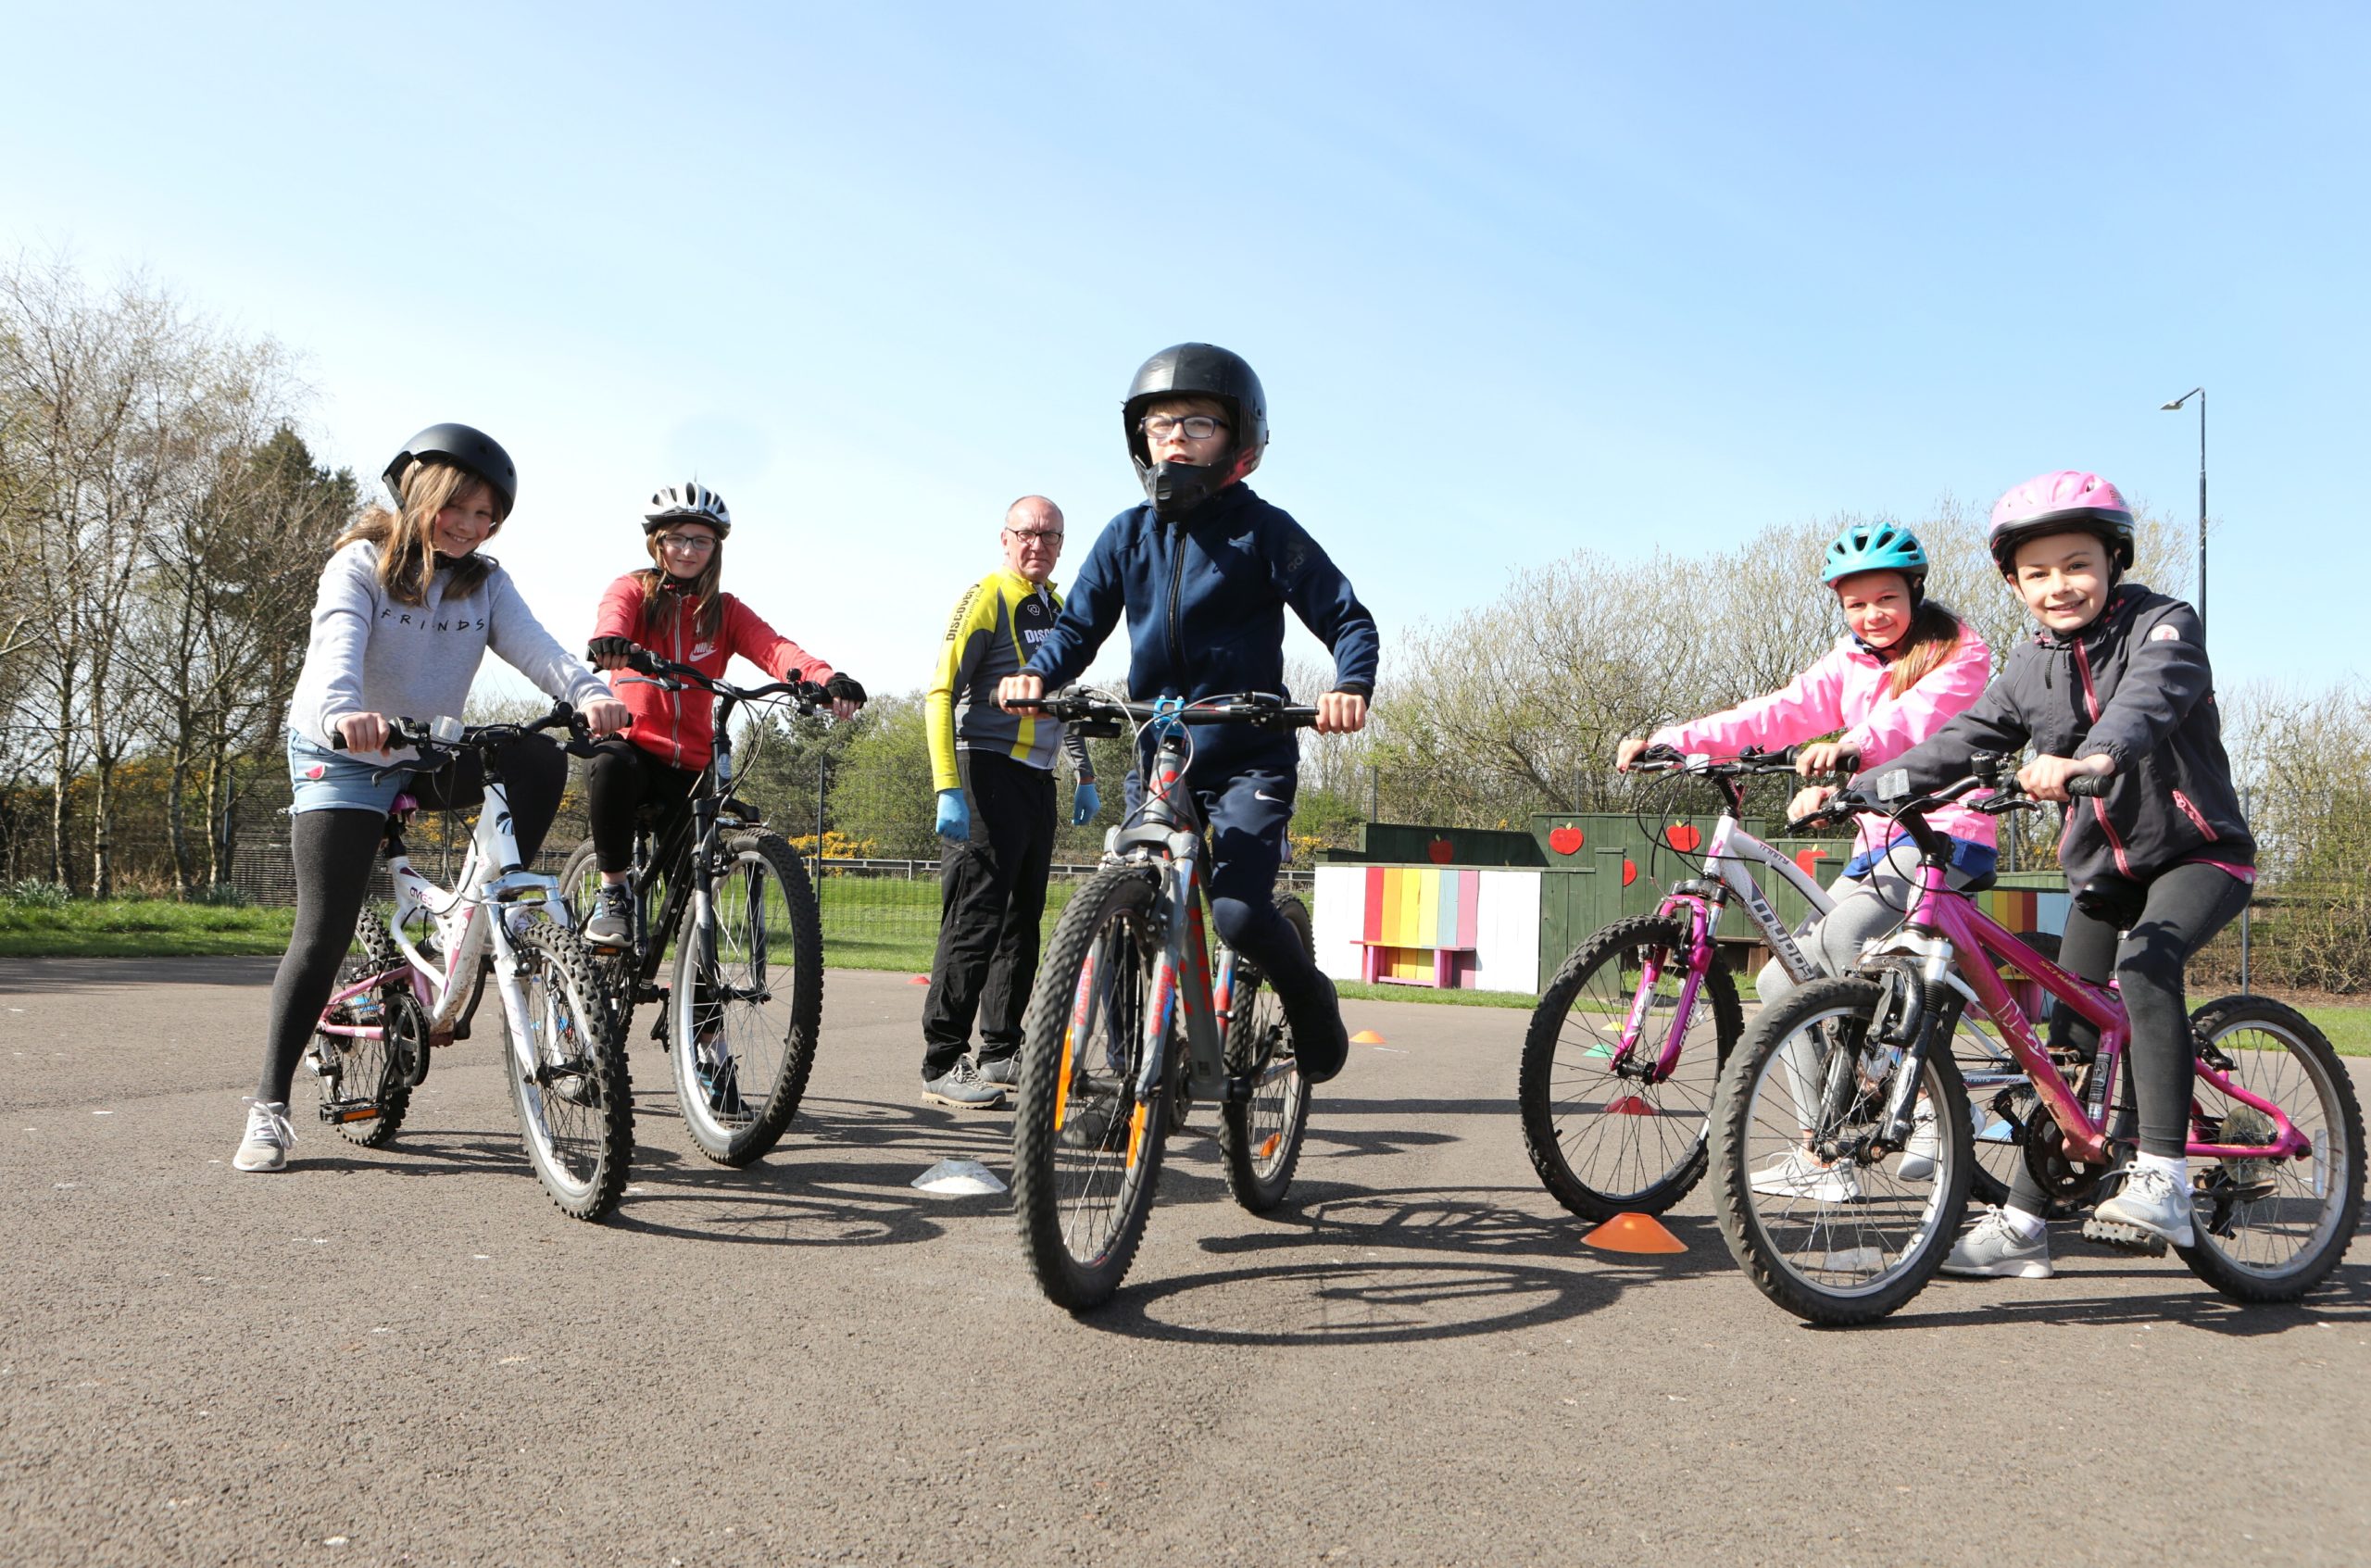 Bikeability sessions have been running at Lochside primary hub in Montrose.